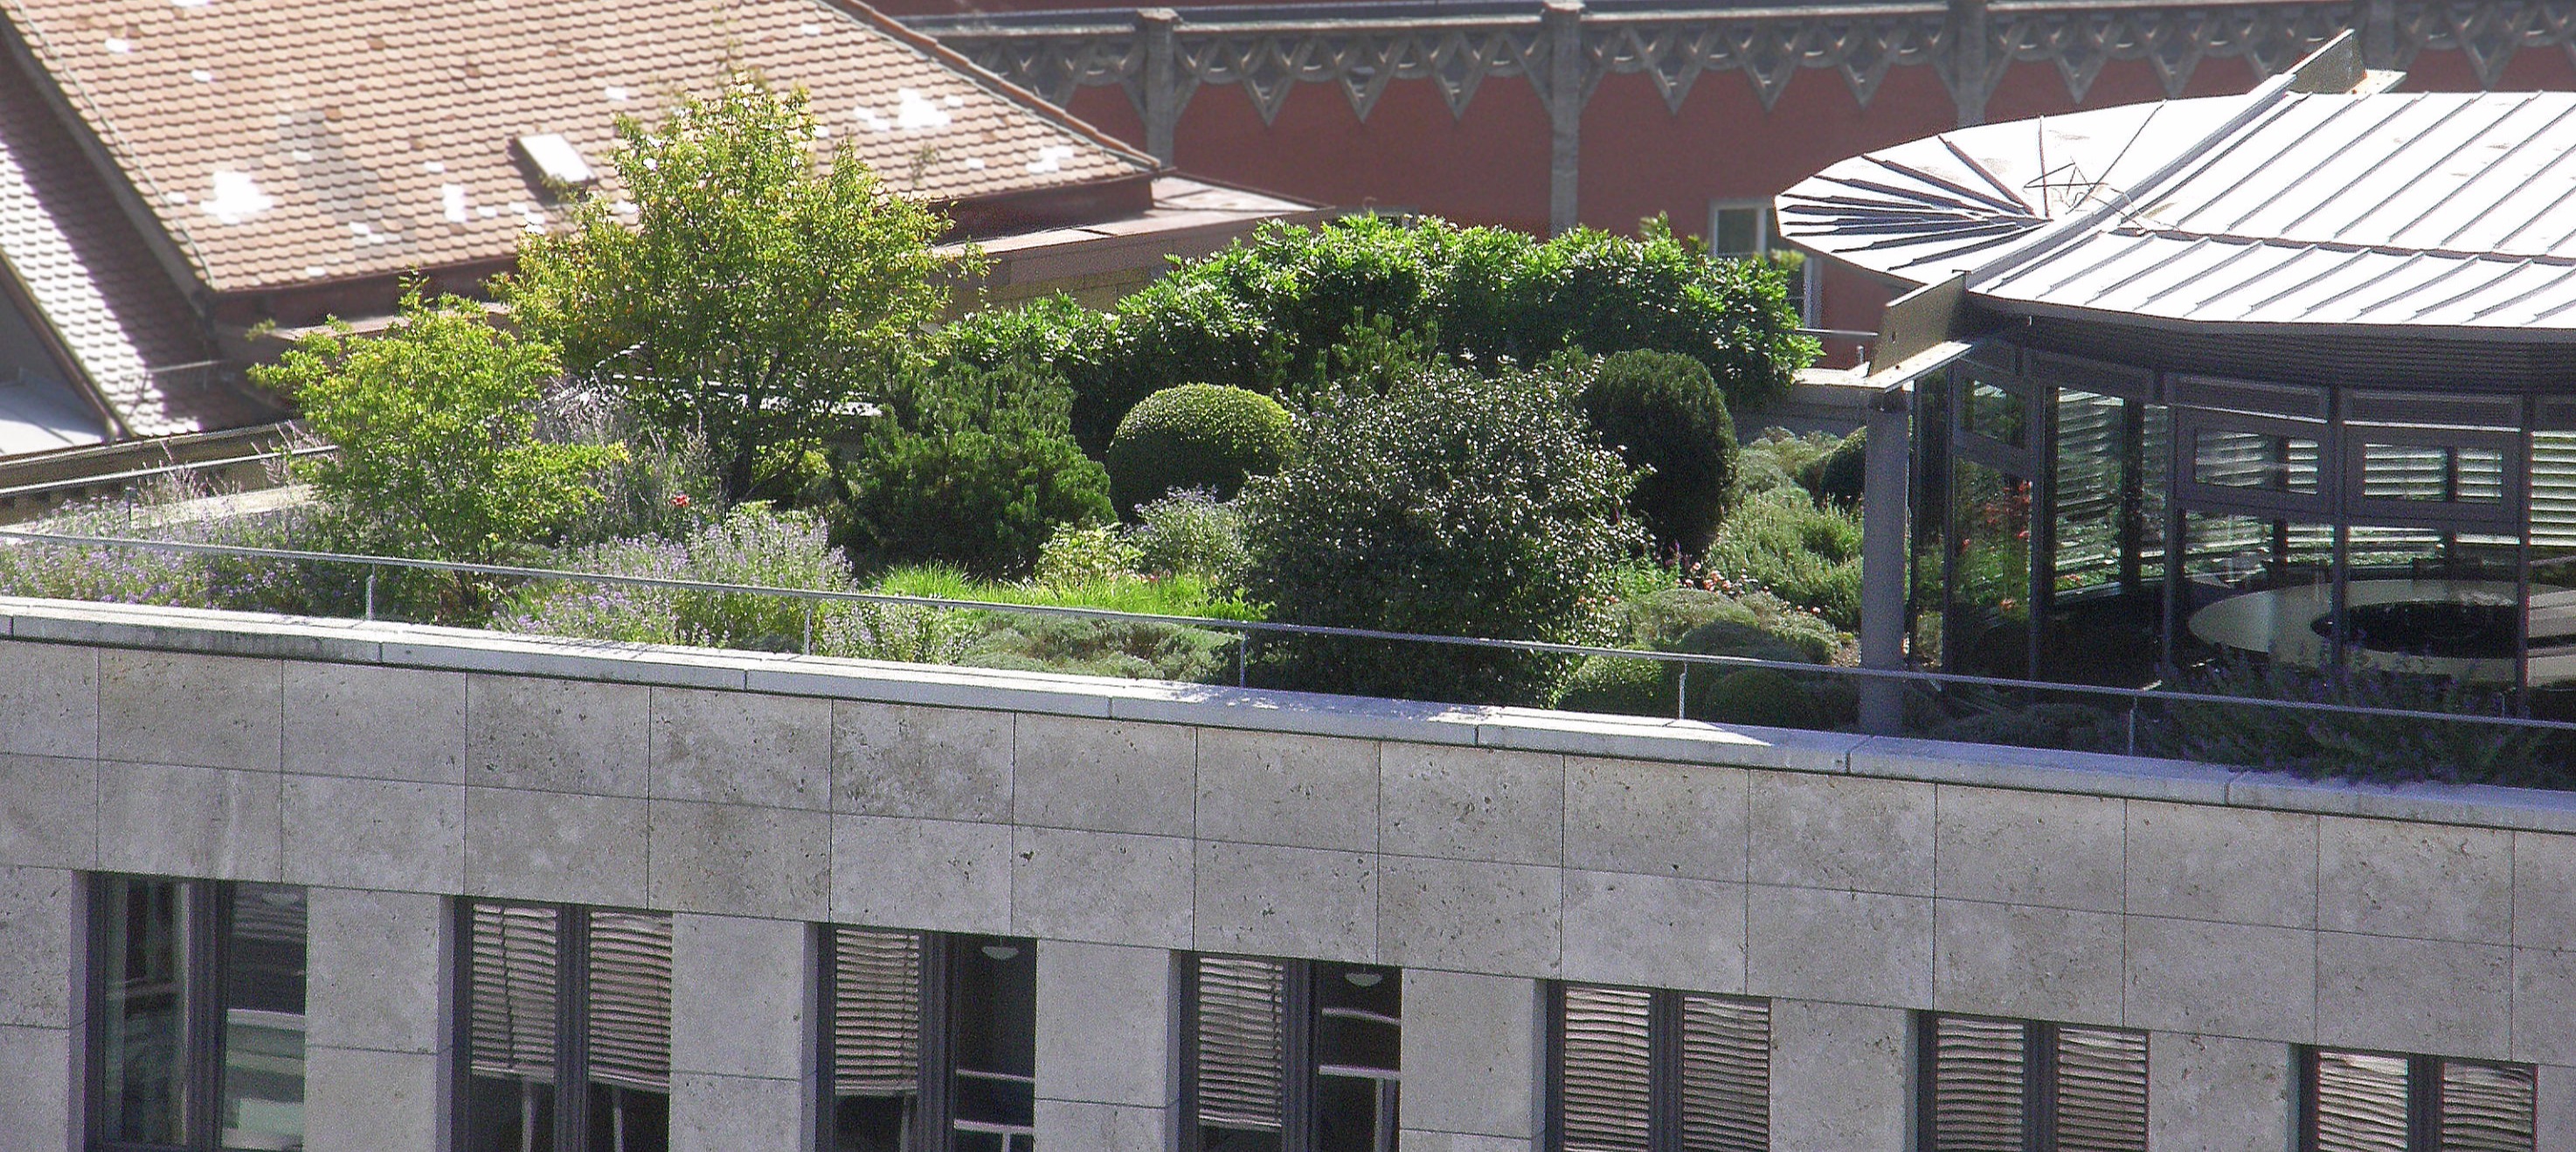 Klima Roof green roof system has been evolved over decades to ensure healthy, diverse, and resilient vegetation on structures.